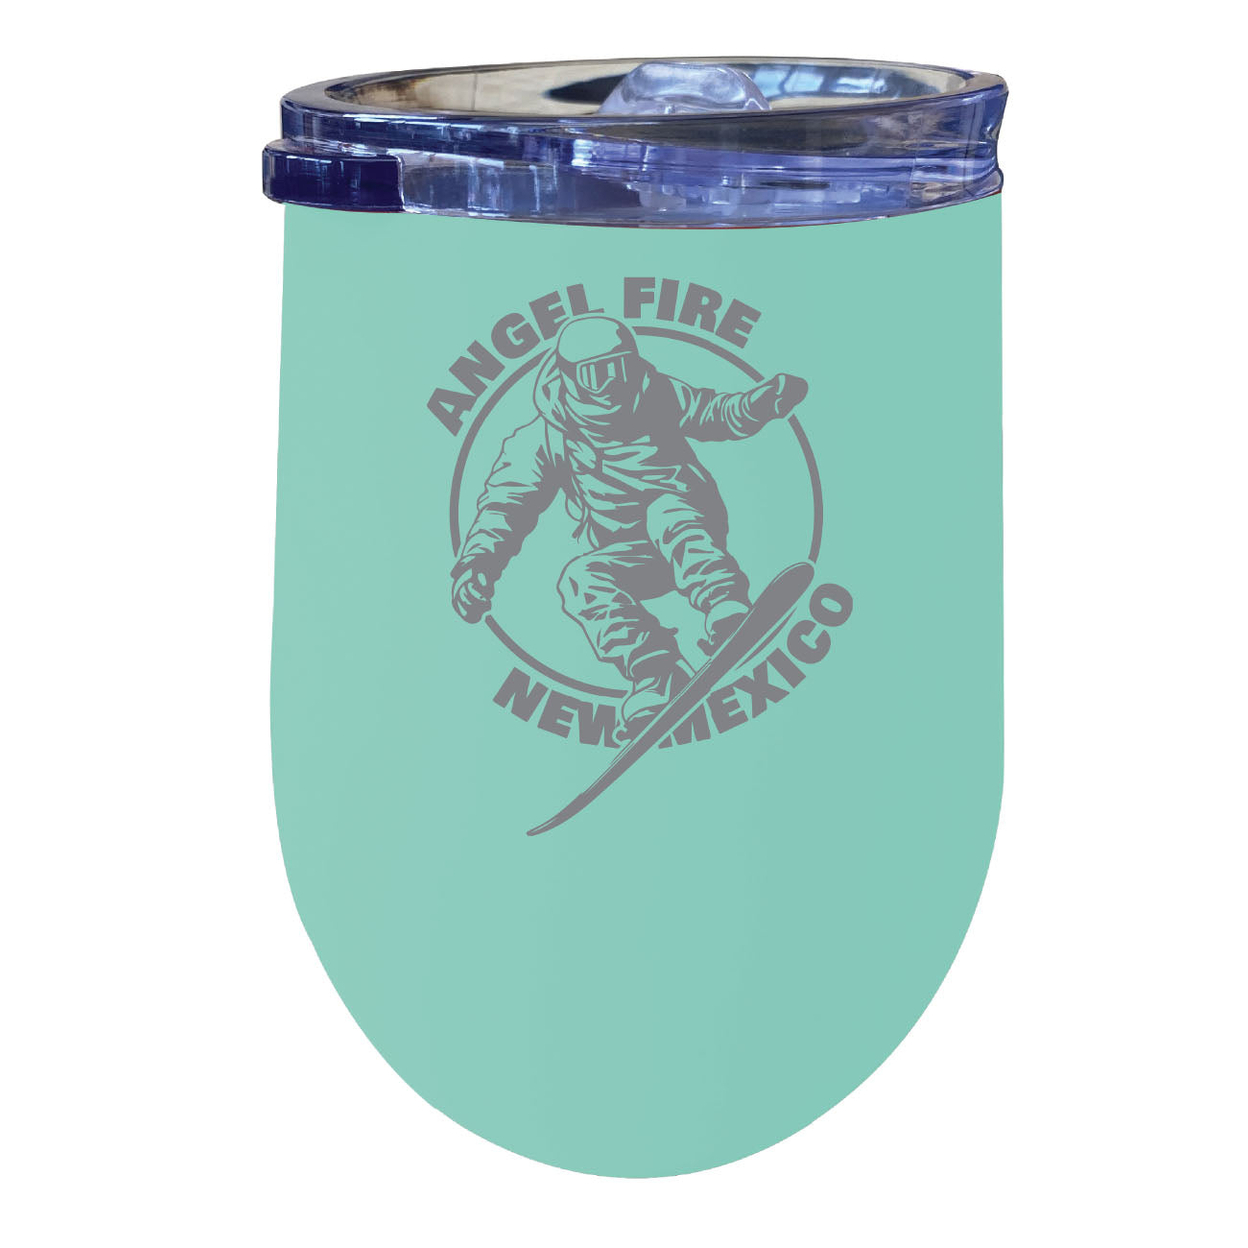 Angel Fire New Mexico Souvenir 12 Oz Engraved Insulated Wine Stainless Steel Tumbler - Seafoam,,4-Pack